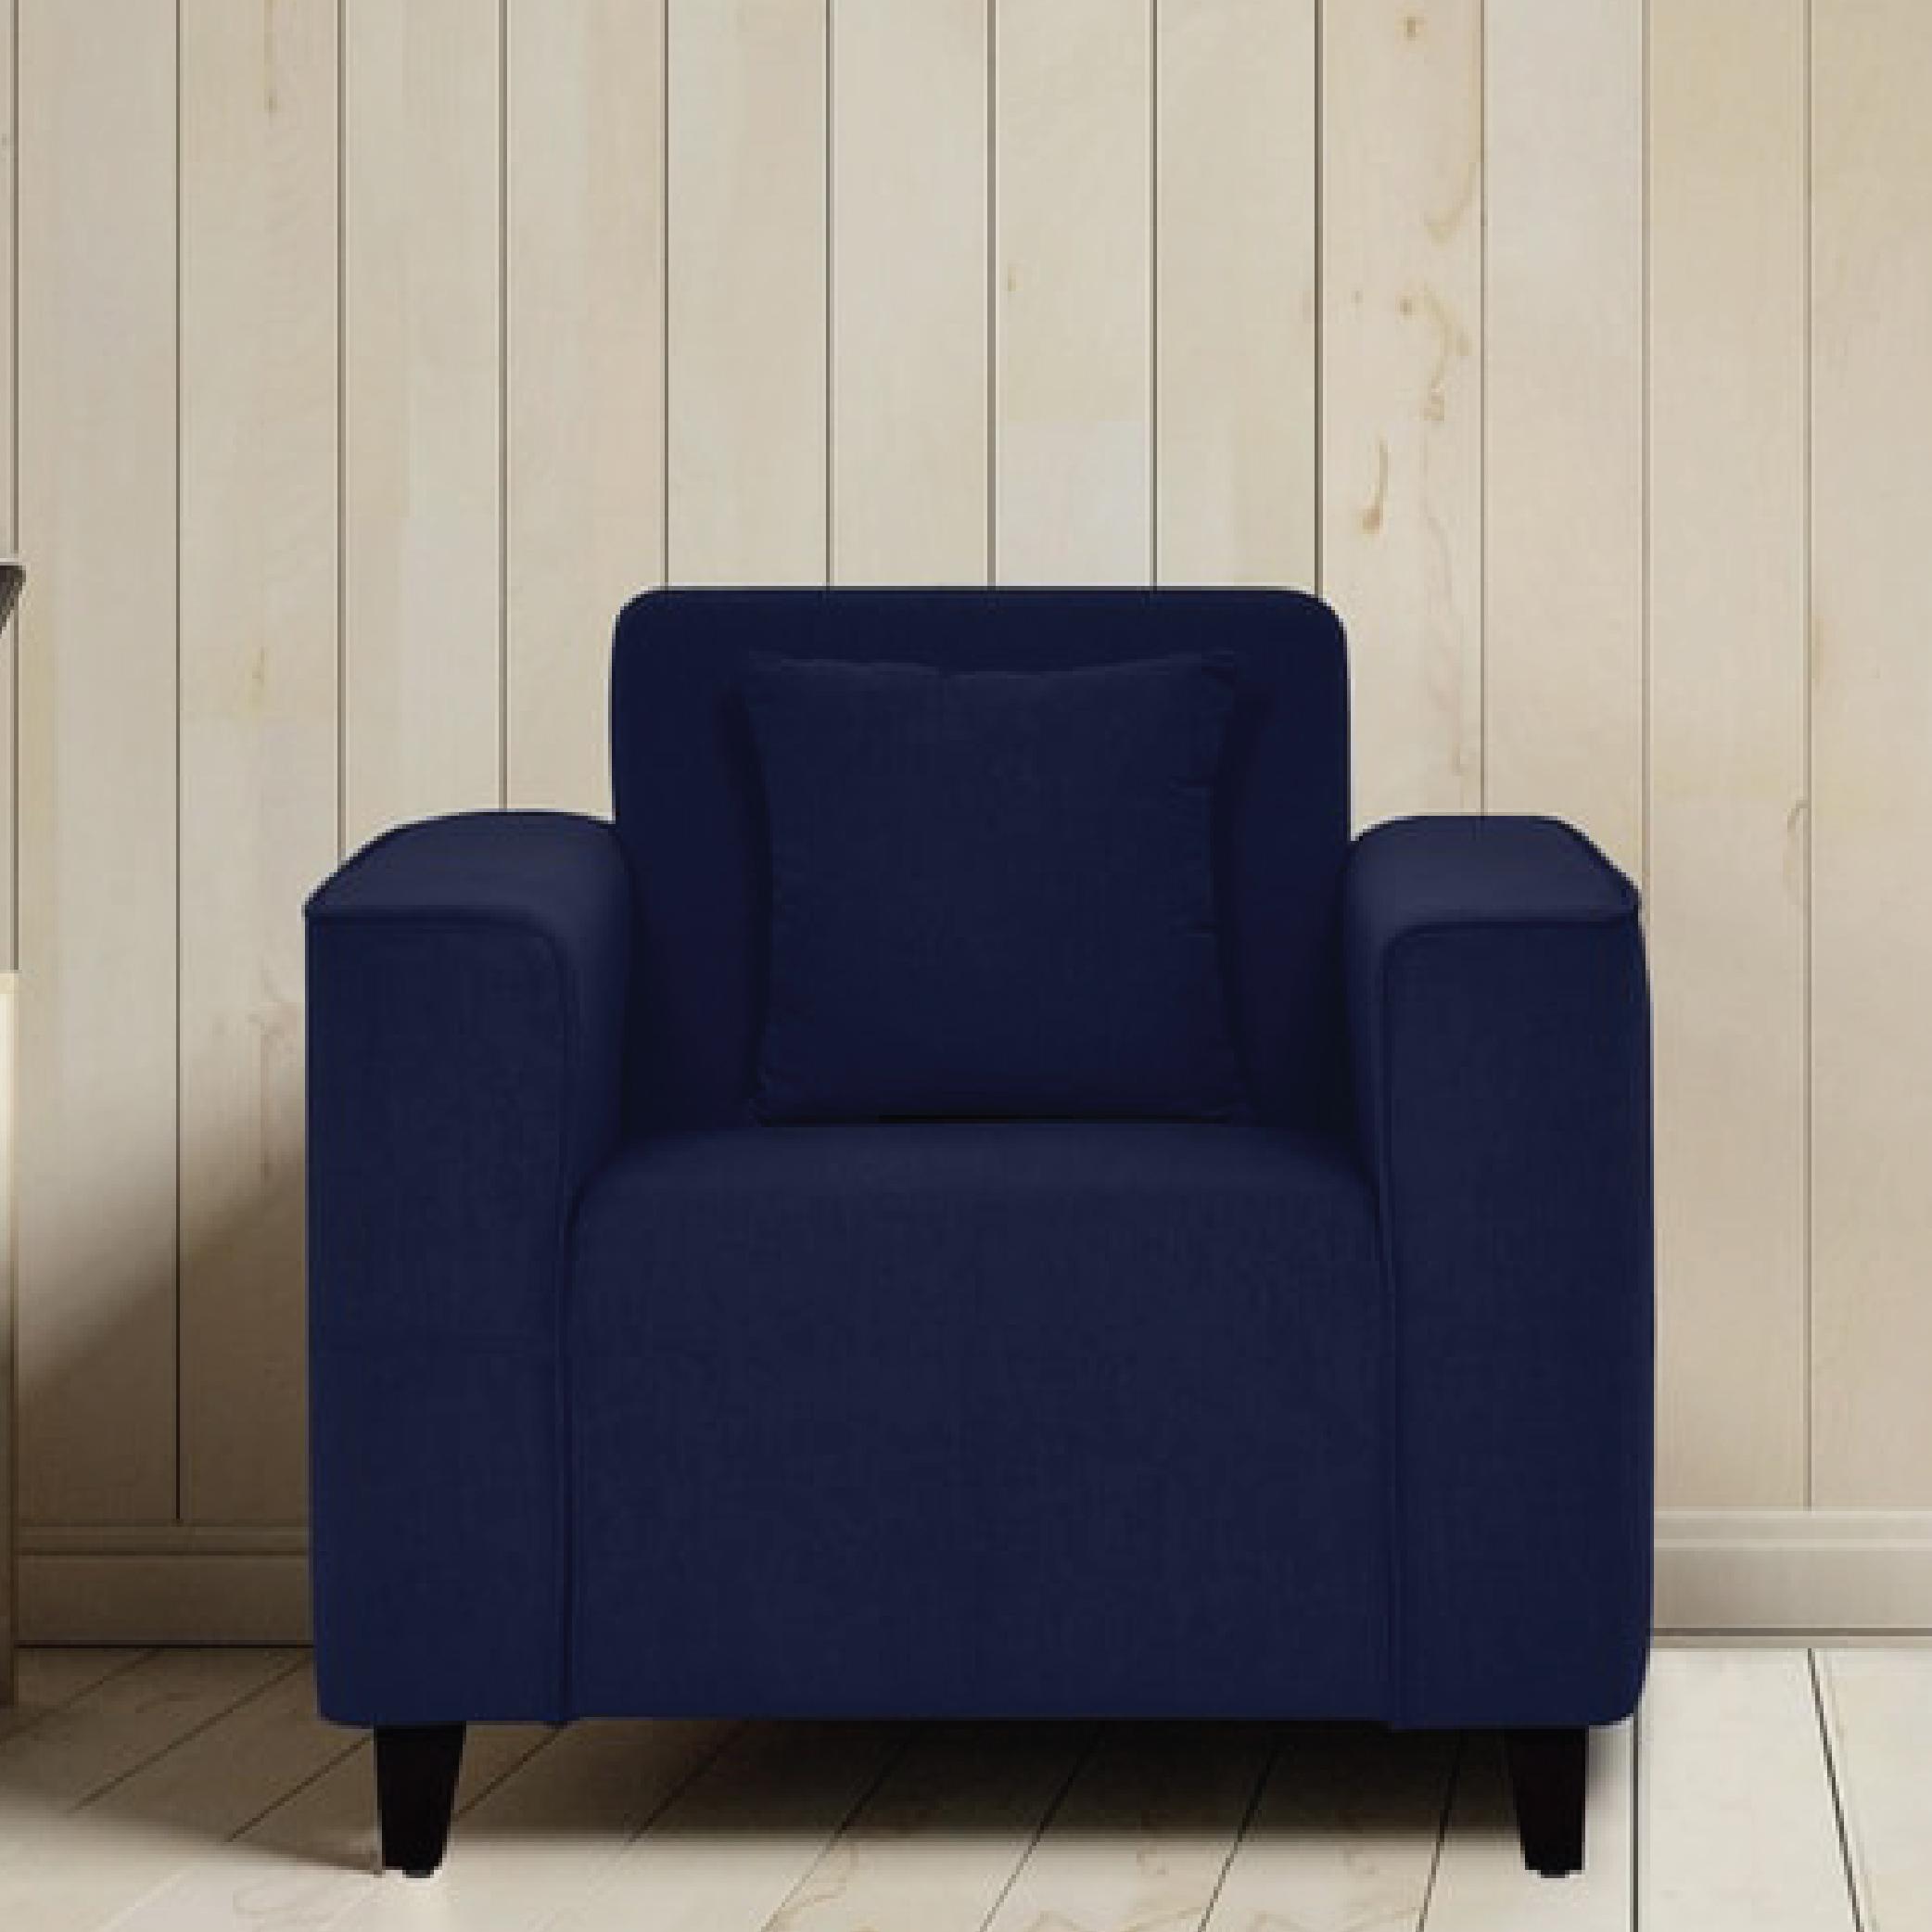 Faenza One Seater Sofa in Navy Blue Colour